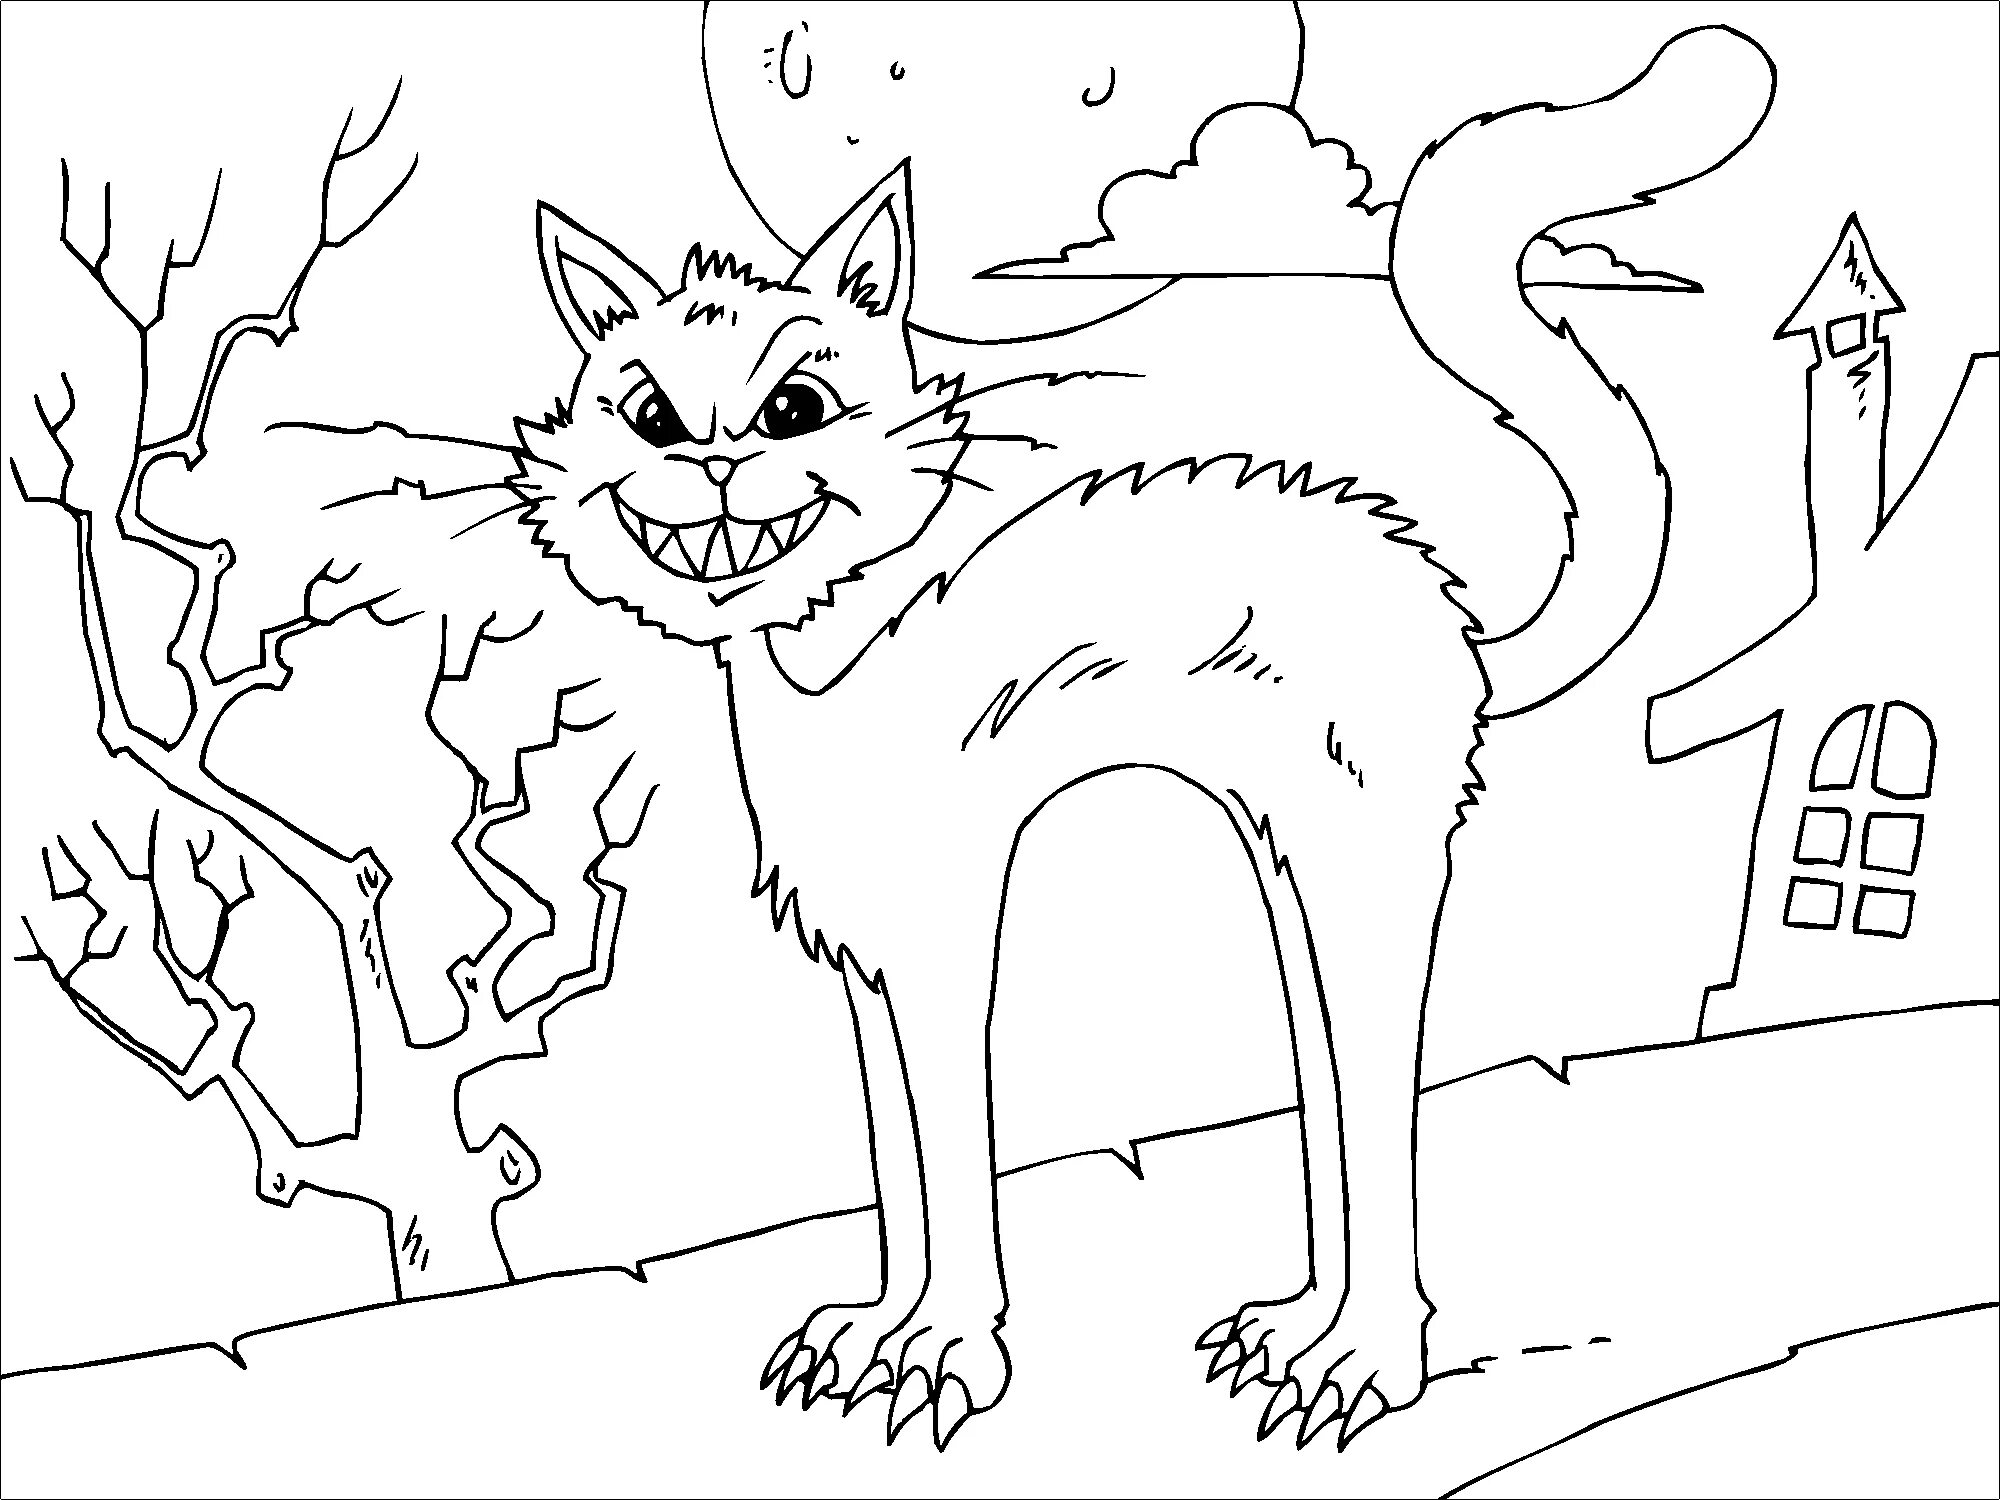 Terrible tabby cat coloring page